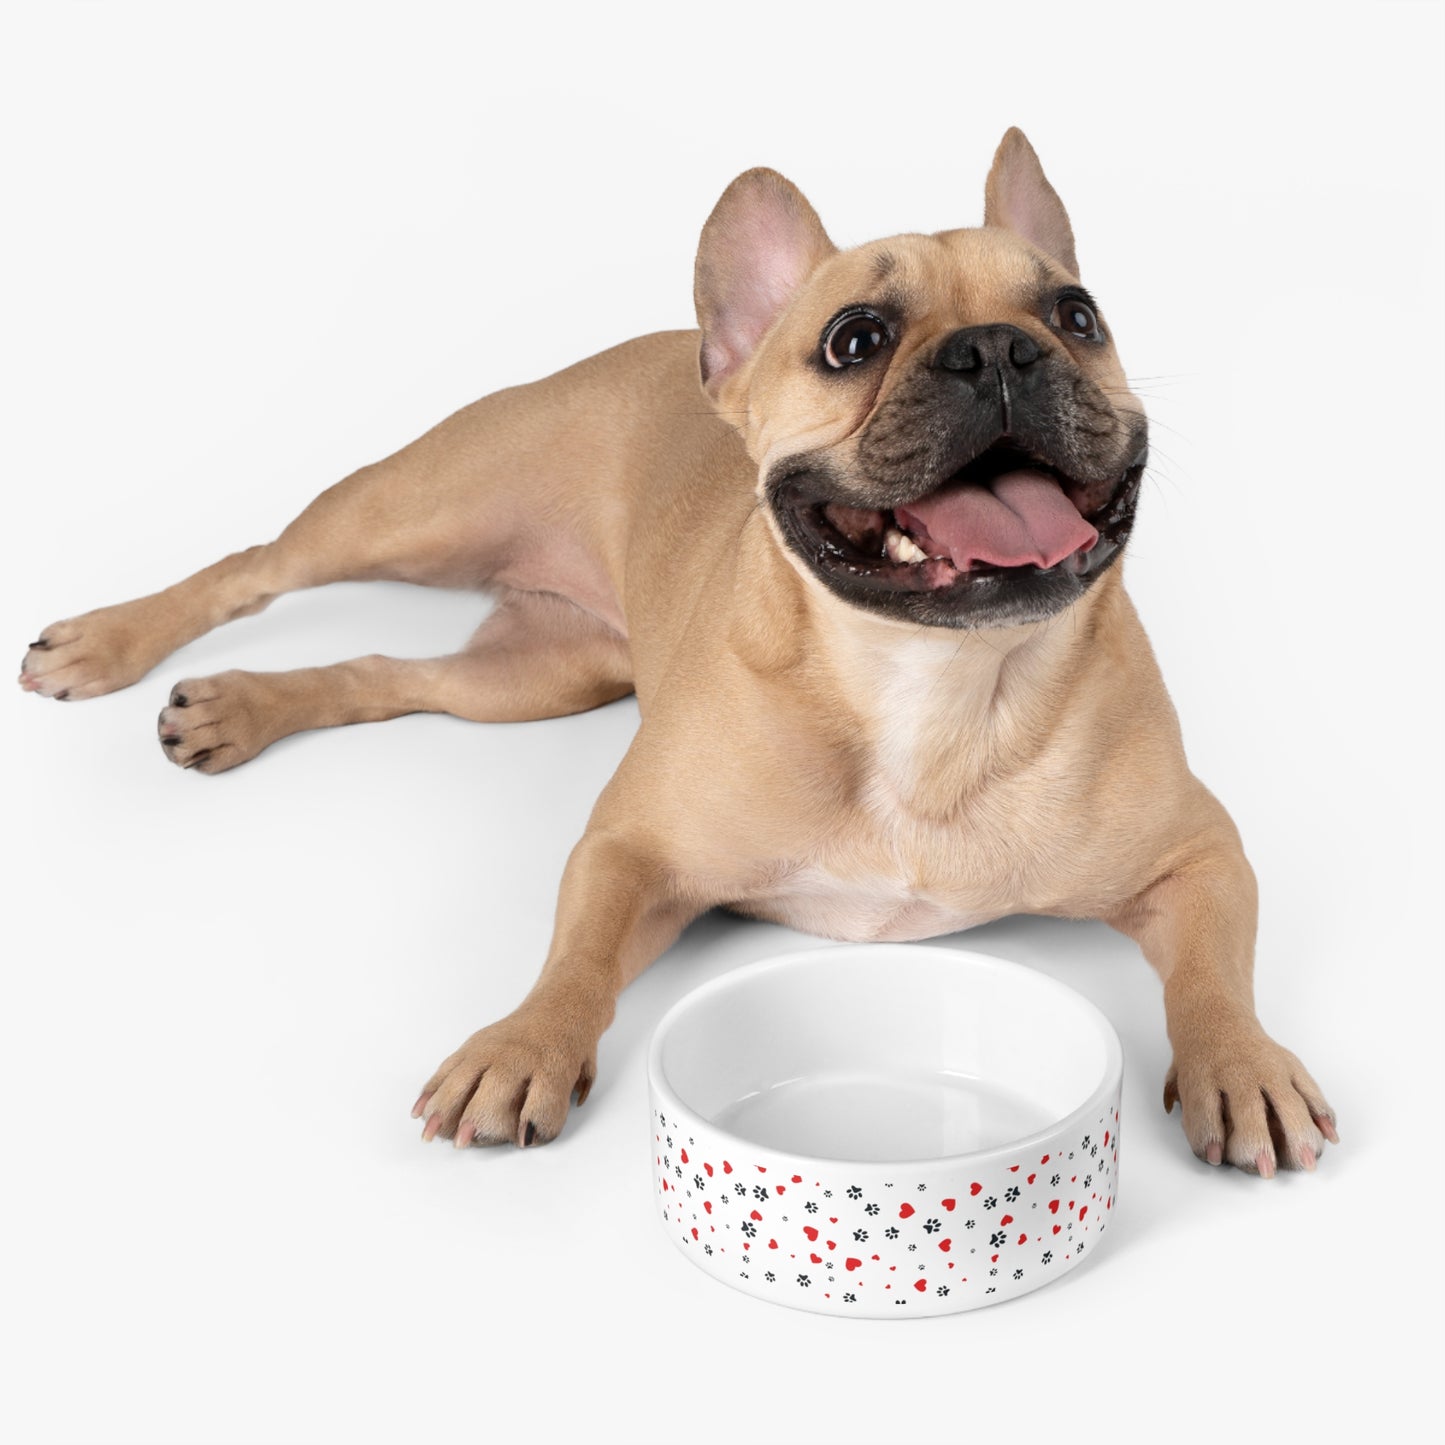 Niccie Paws and Hearts Pet Bowl: Stylish, Durable, and Functional